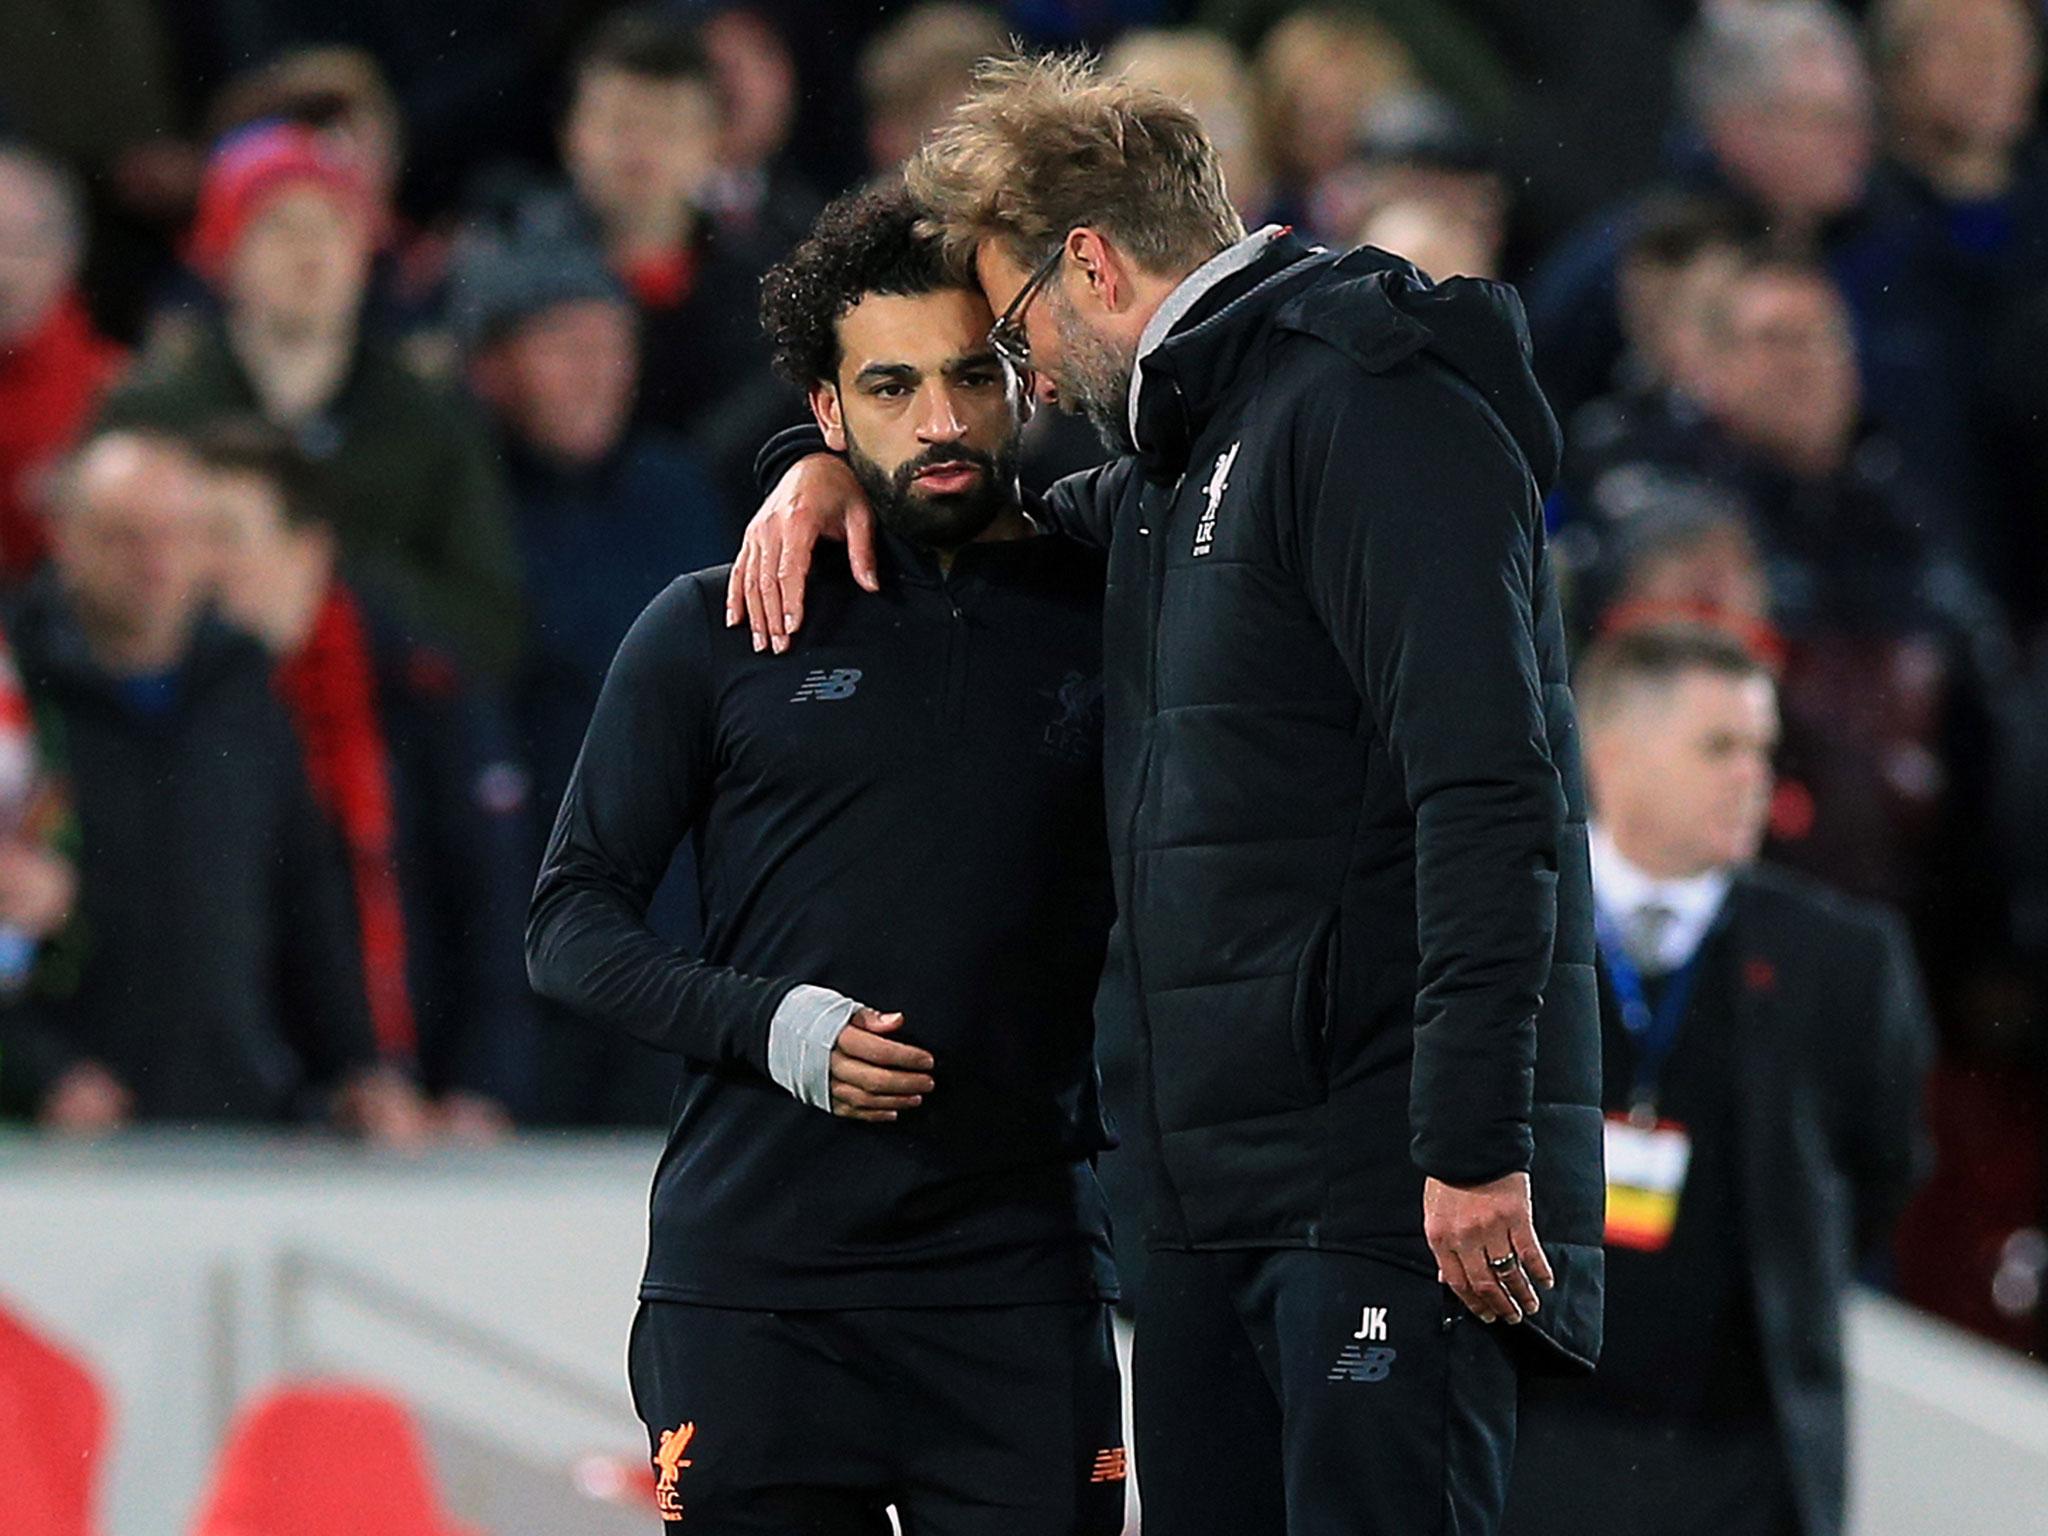 Jurgen Klopp and Mohamed Salah together after the final whistle at Anfield